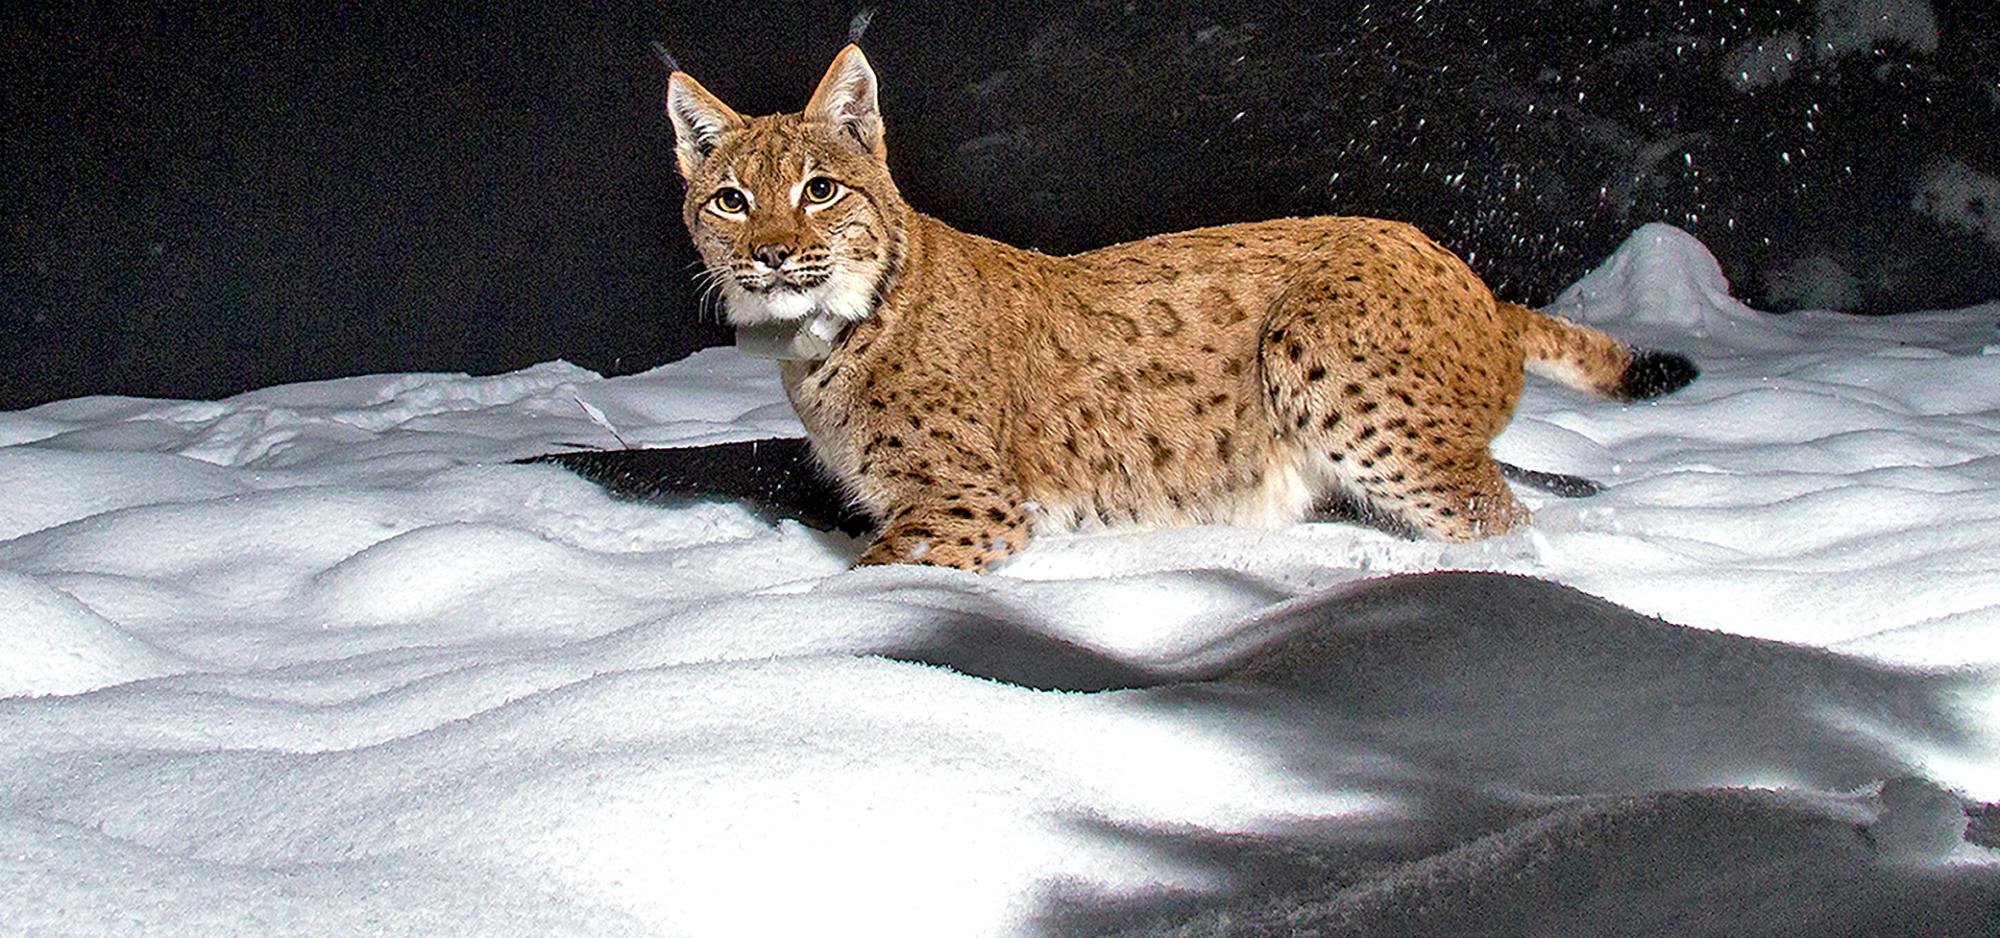 Night-time photo trap image shows lynx Skadi in the snow